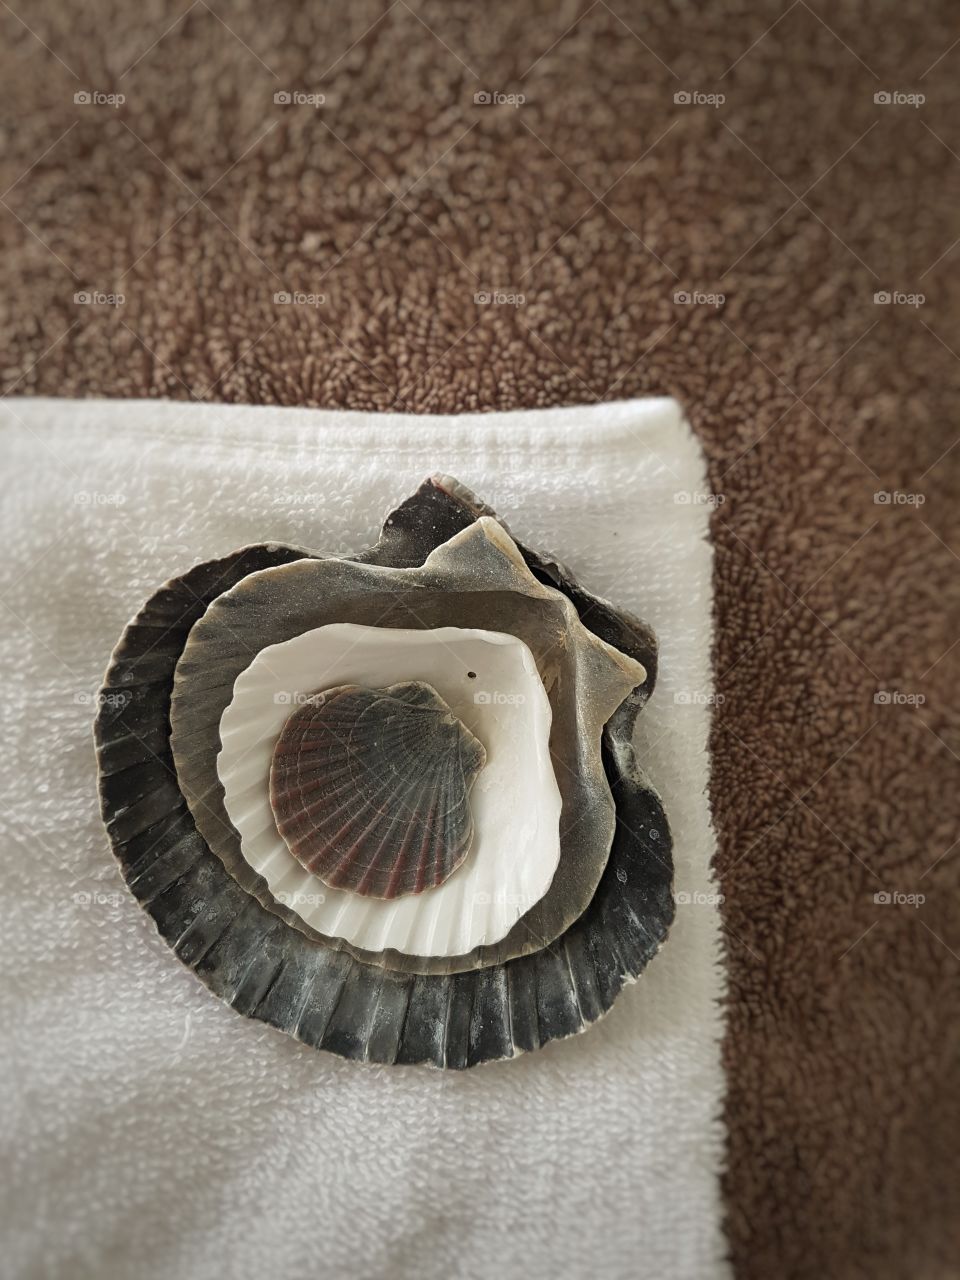 Nesting Sea Shells on stack of folded towels